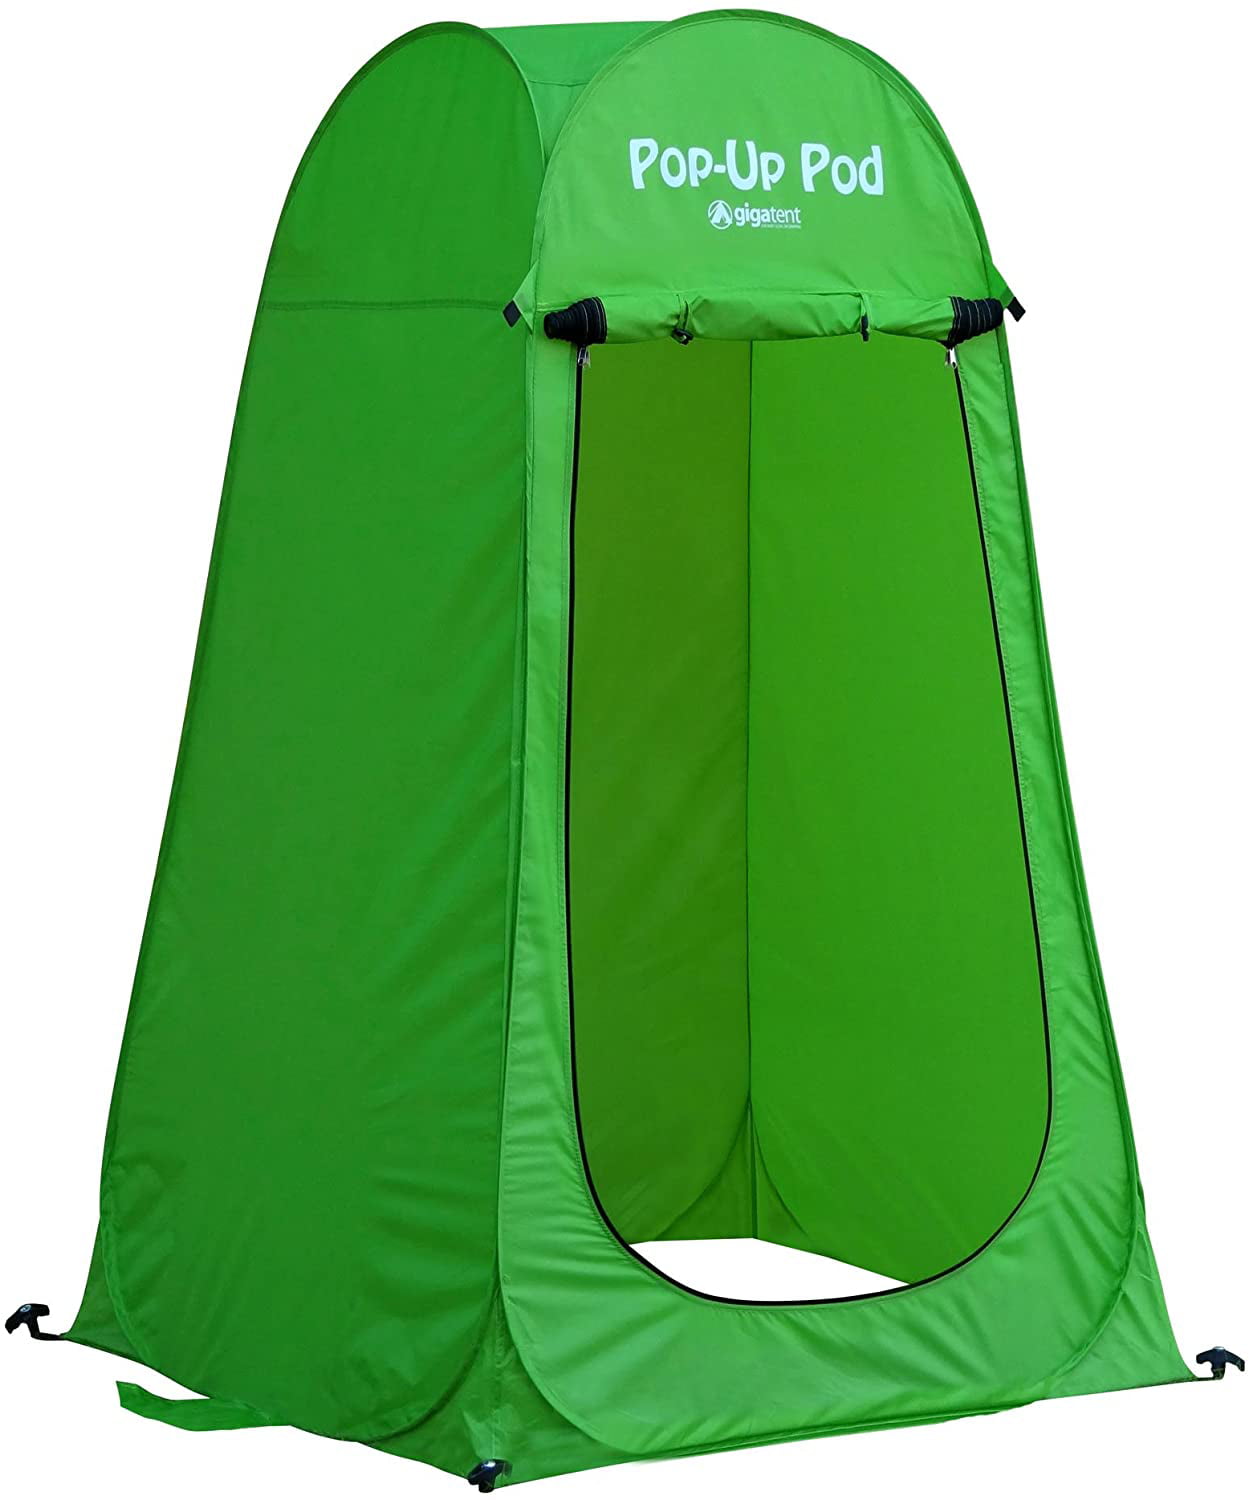 Fully Automatic Pop Up Tent Outdoor Shower Fishing Camping Toilet Shelter